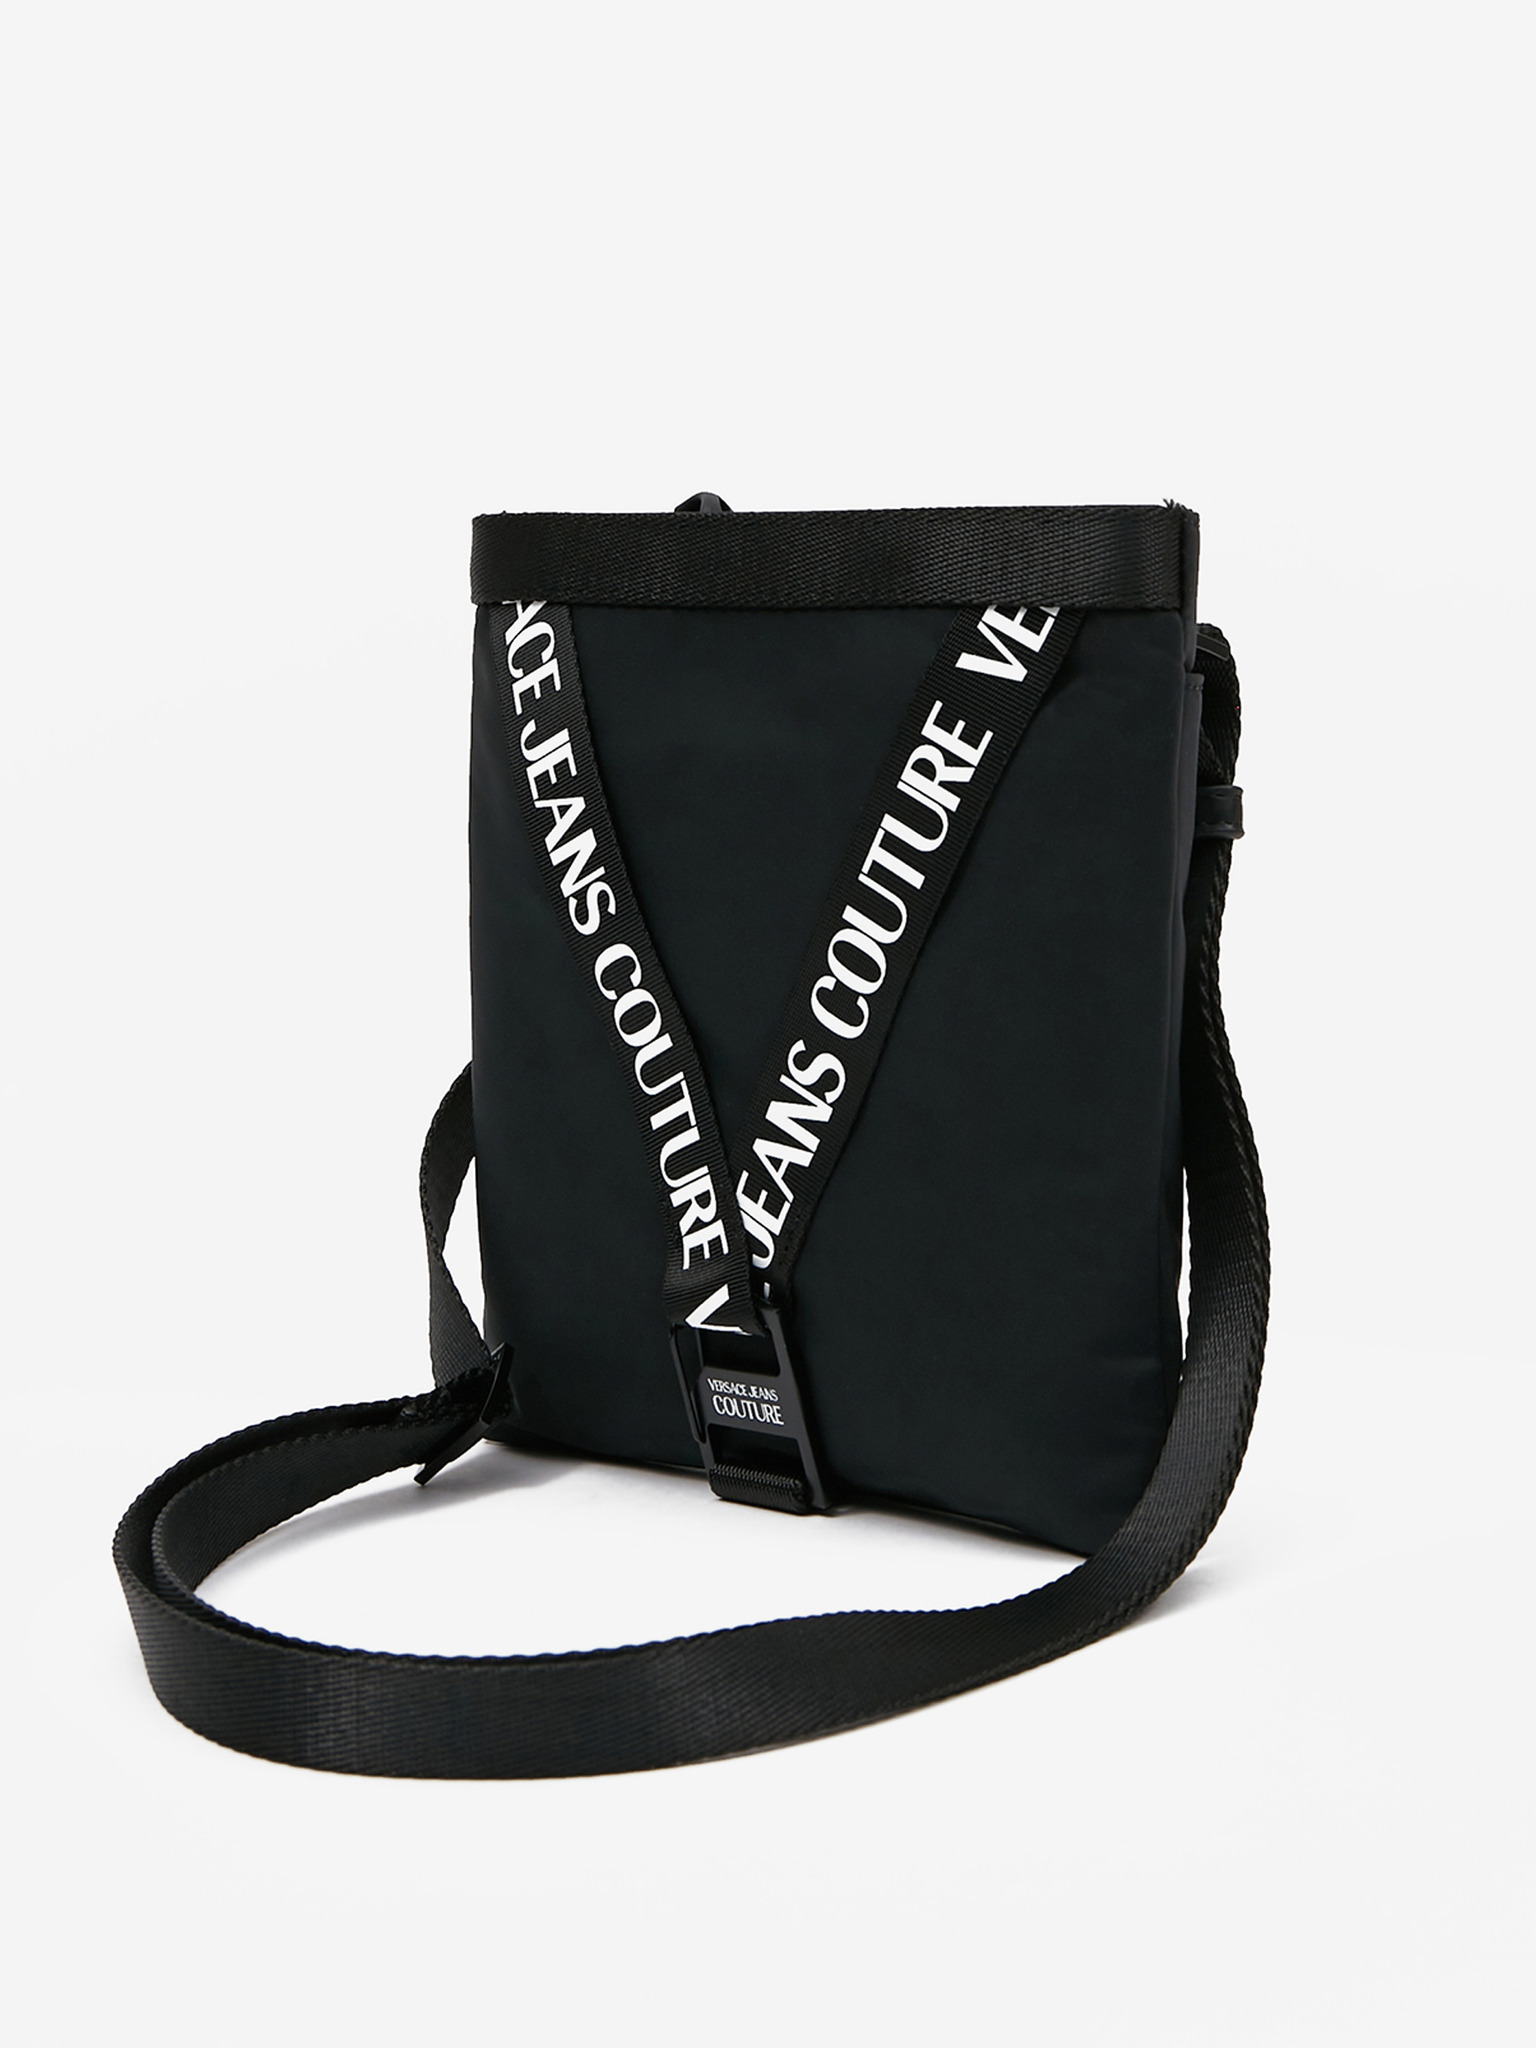 Versace Jeans Couture White Couture I Crossbody Bag